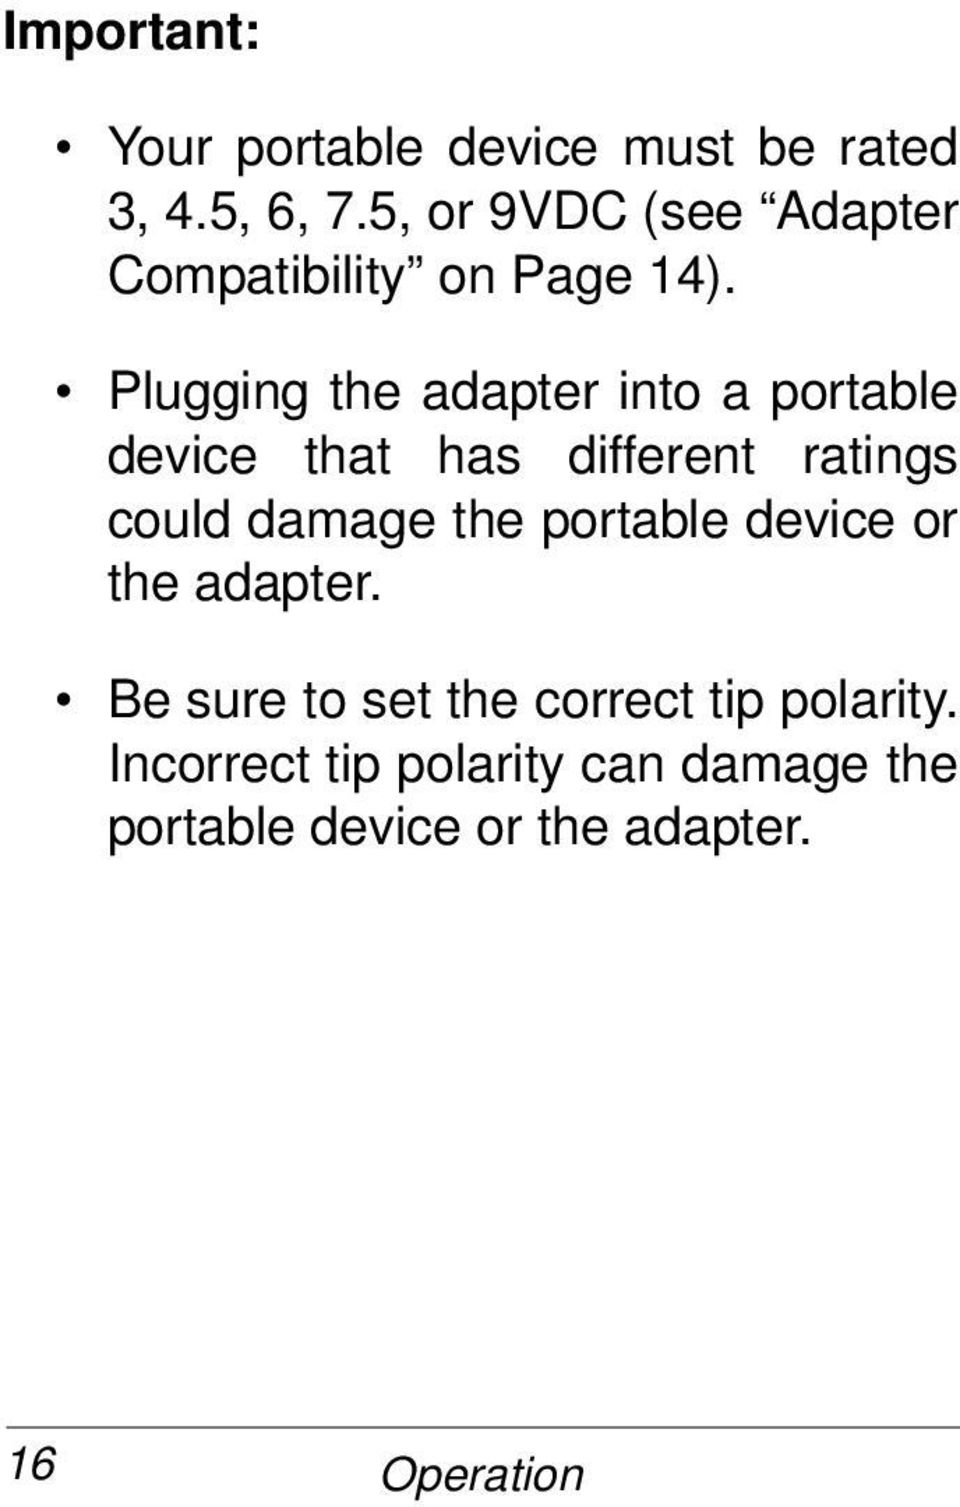 Plugging the adapter into a portable device that has different ratings could damage the